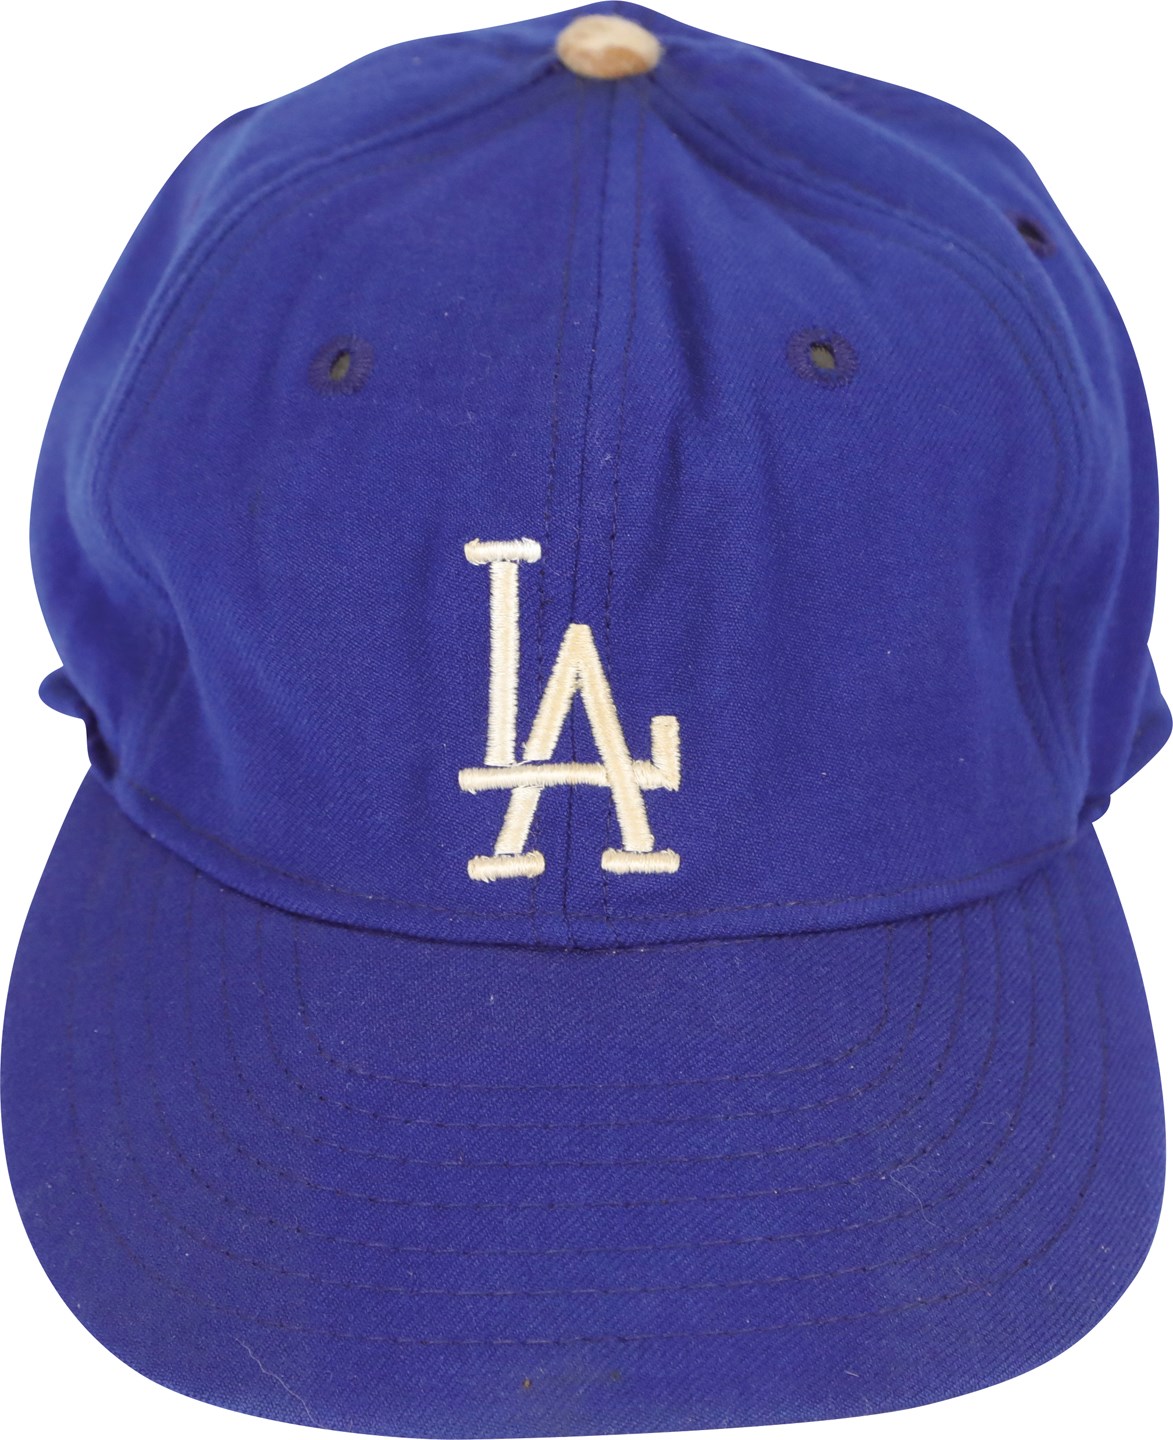 - 1965 Sandy Koufax Game Worn Hat from Triple Crown & Cy Young Award Year (Locker Room Provenance)